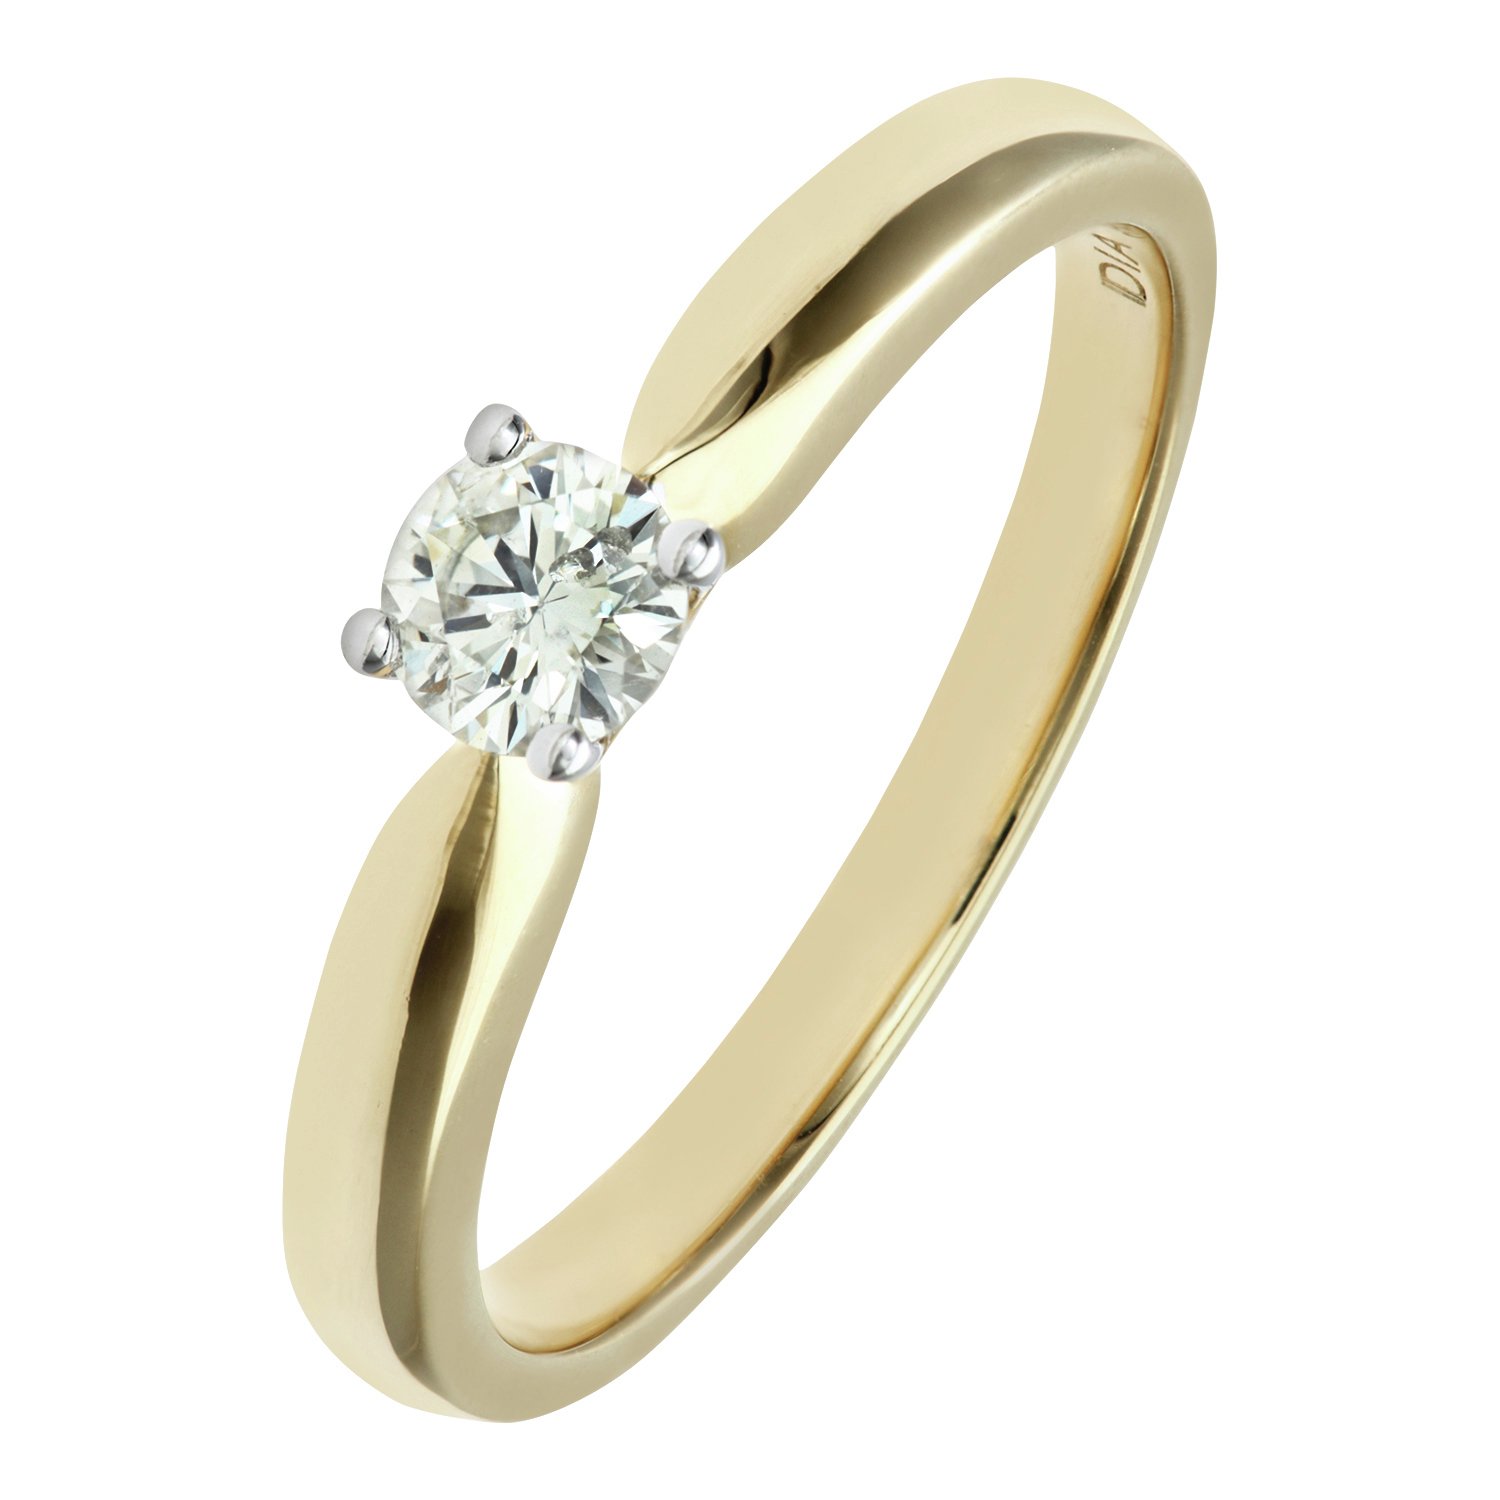 Everlasting Love 9ct Gold Diamond Solitaire Ring - Size P